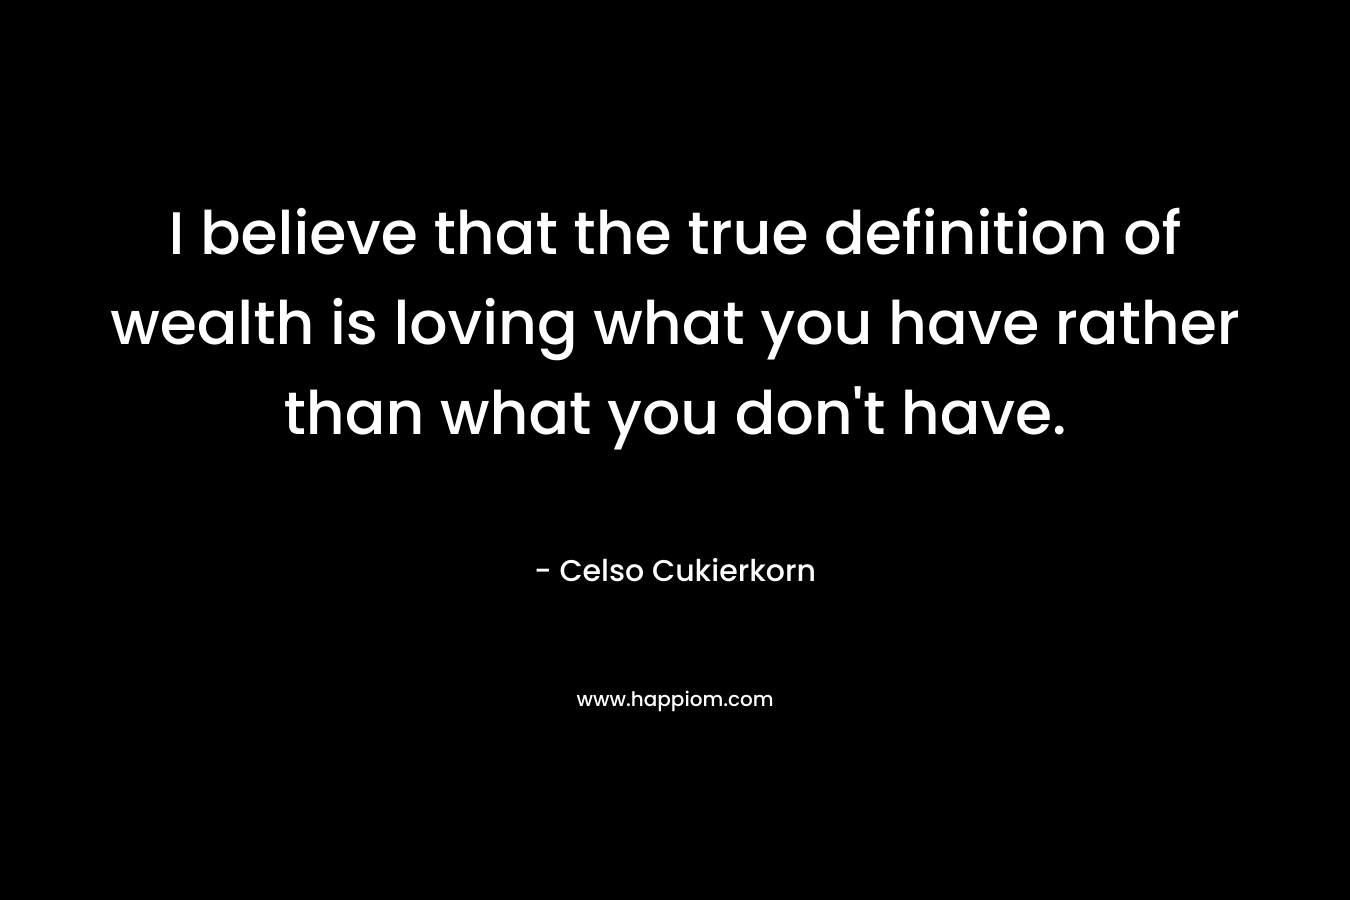 I believe that the true definition of wealth is loving what you have rather than what you don’t have. – Celso Cukierkorn